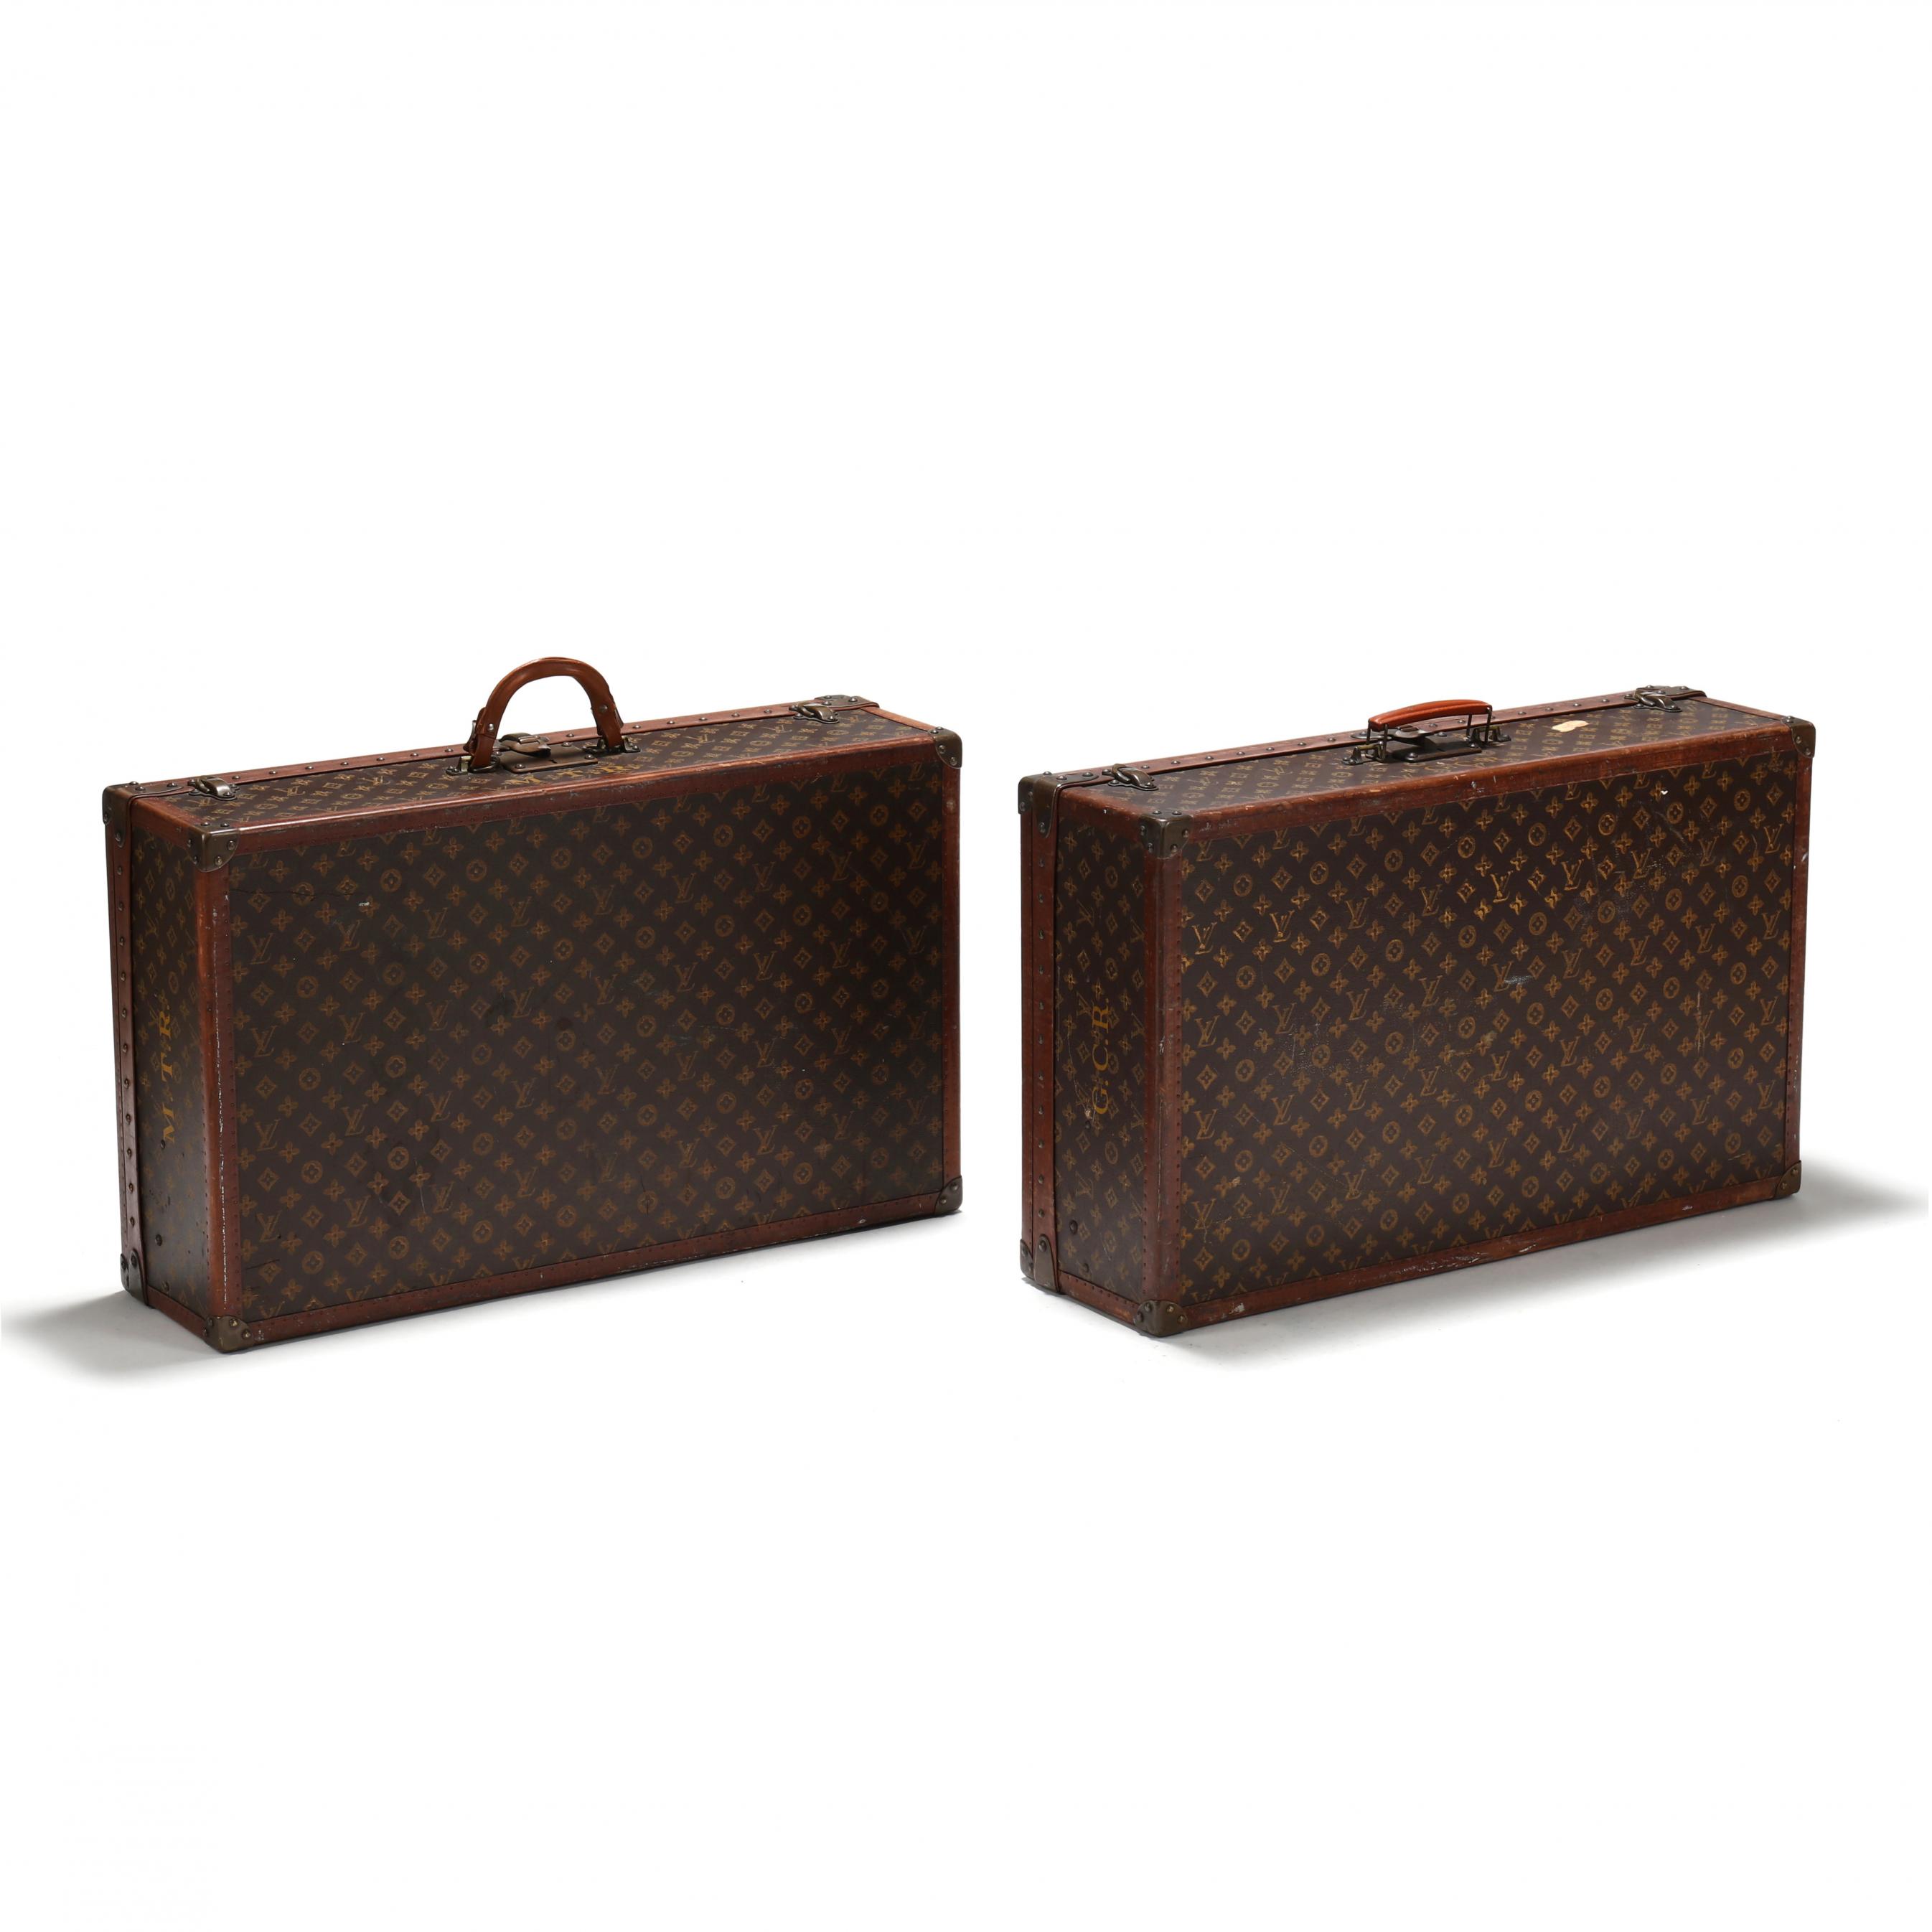 A Matched Pair of Vintage Louis Vuitton Alzer 70 Trunks (Lot 3028 - Luxury  Accessories, Jewelry, & SilverMar 16, 2023, 10:00am)